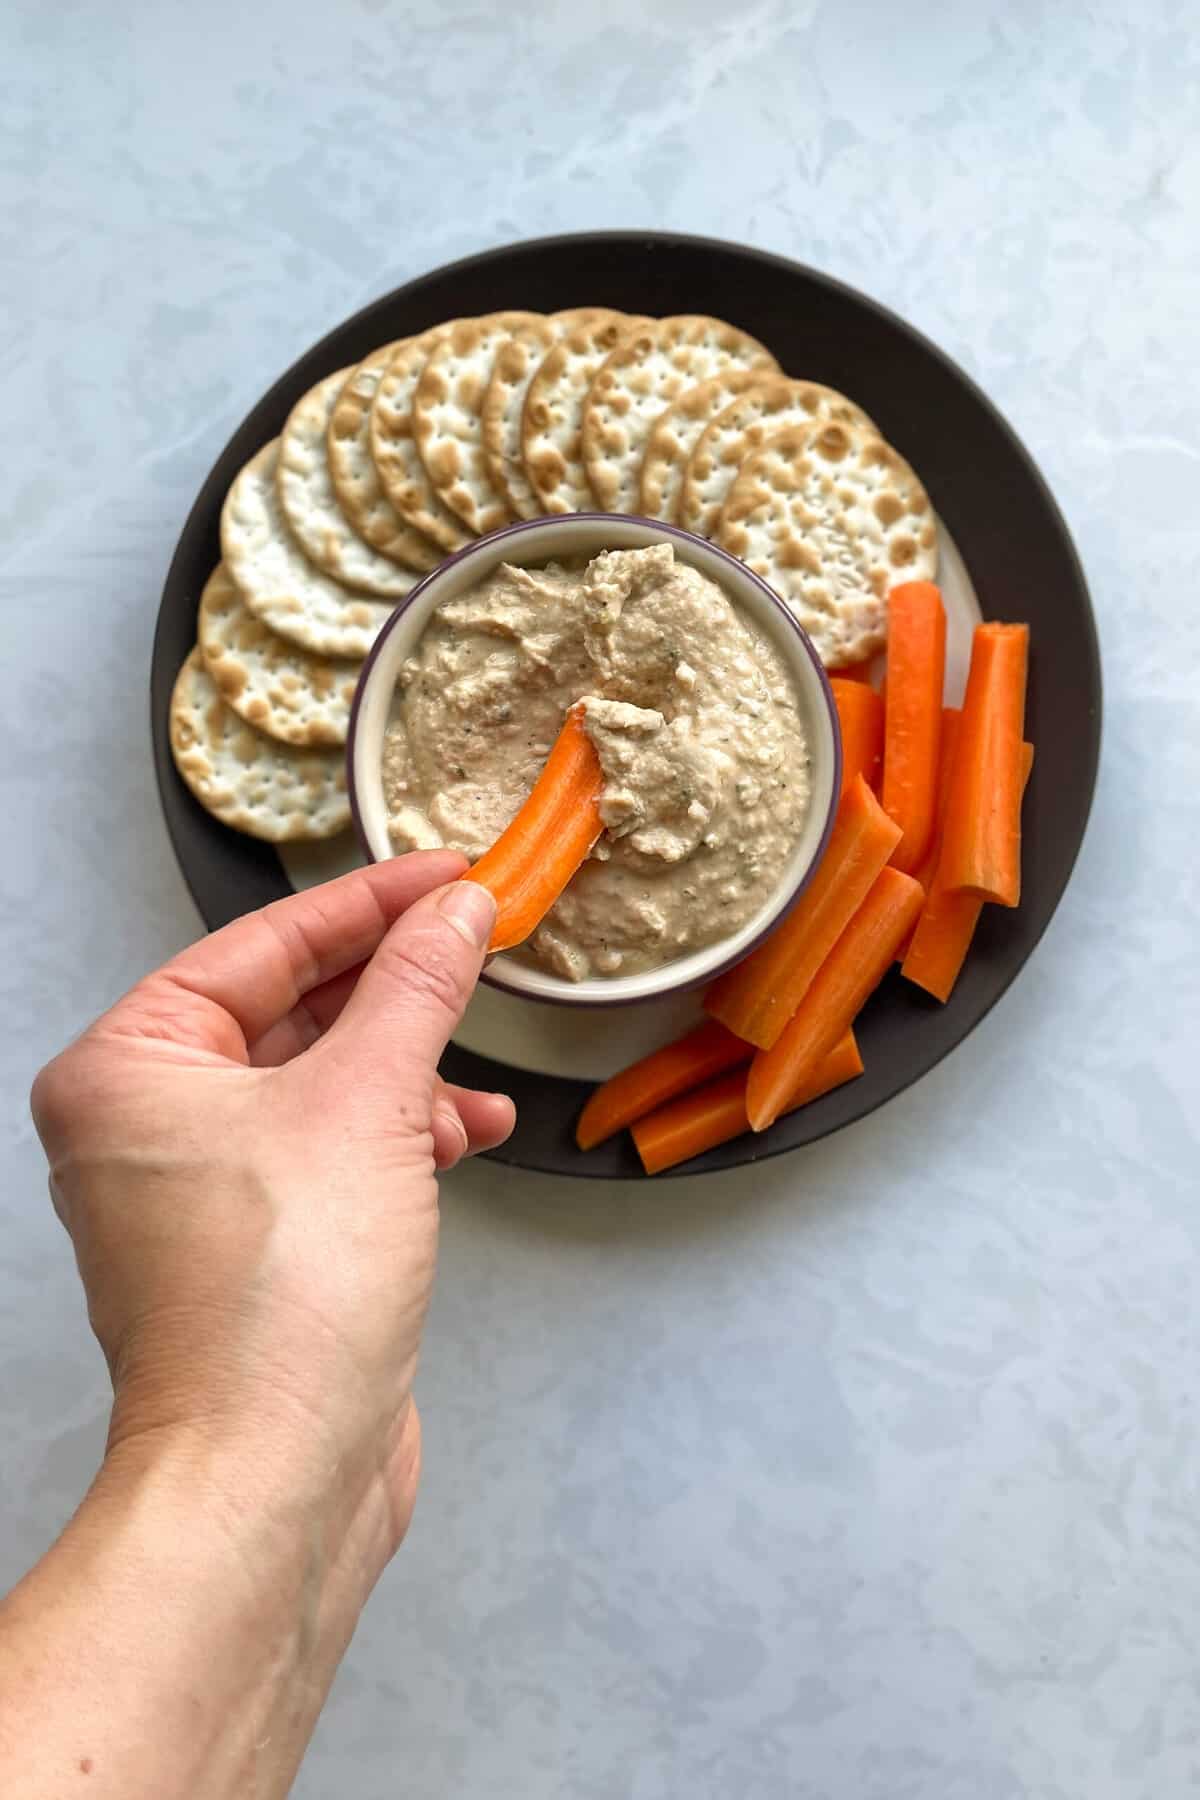 hand dipping a carrot into bowl of dip on plate with crackers and carrots.